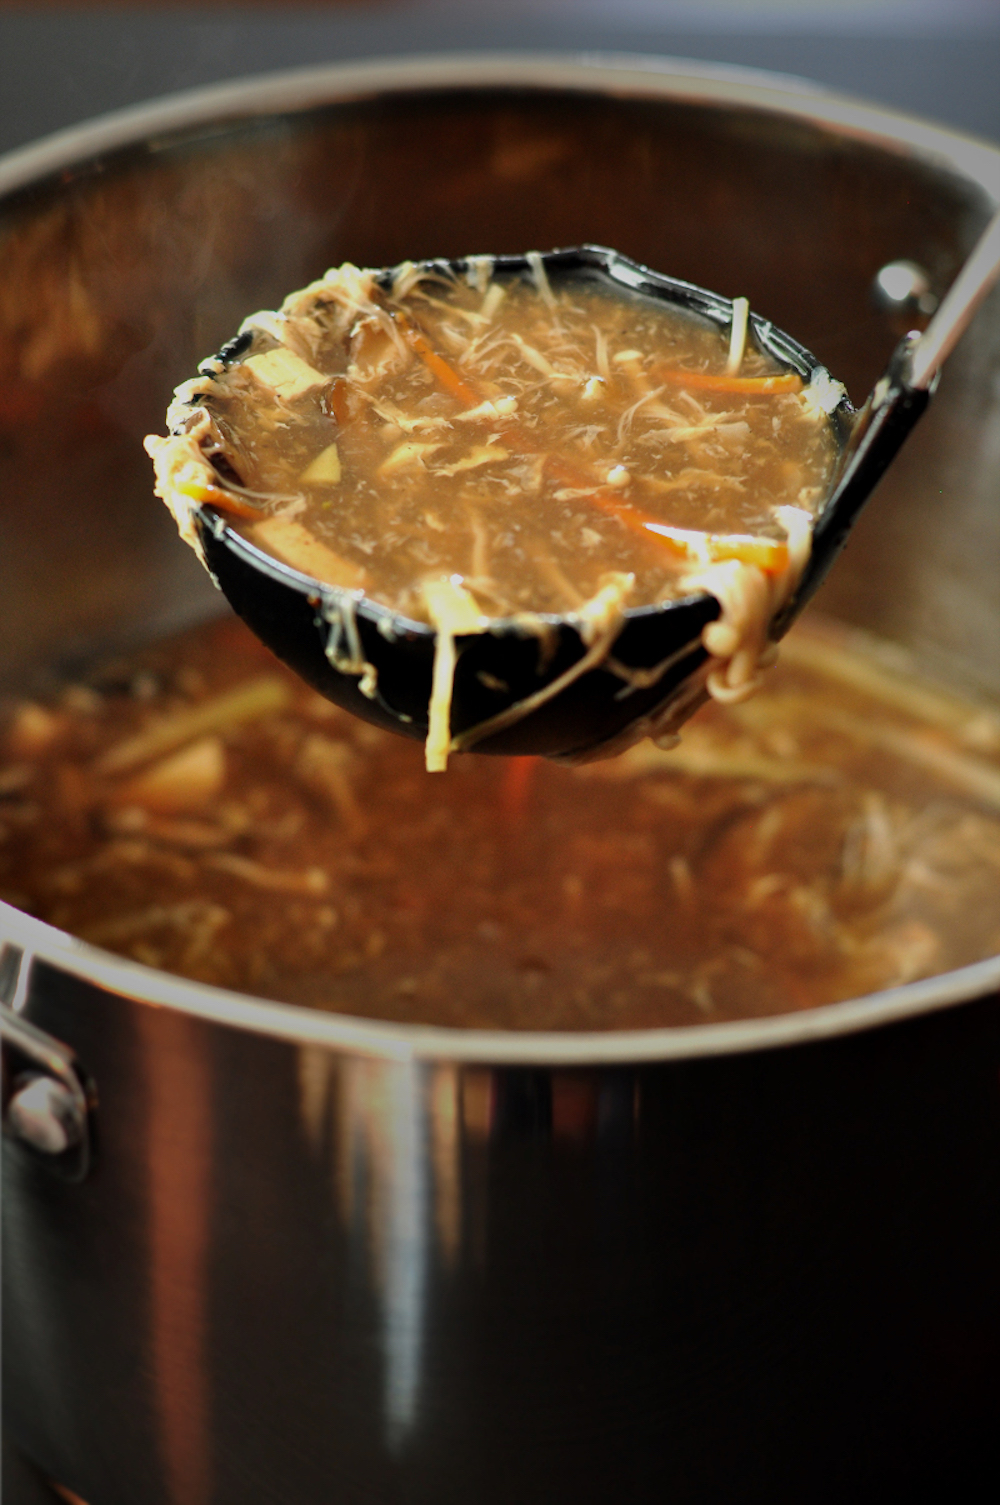 Ladling hot and sour soup